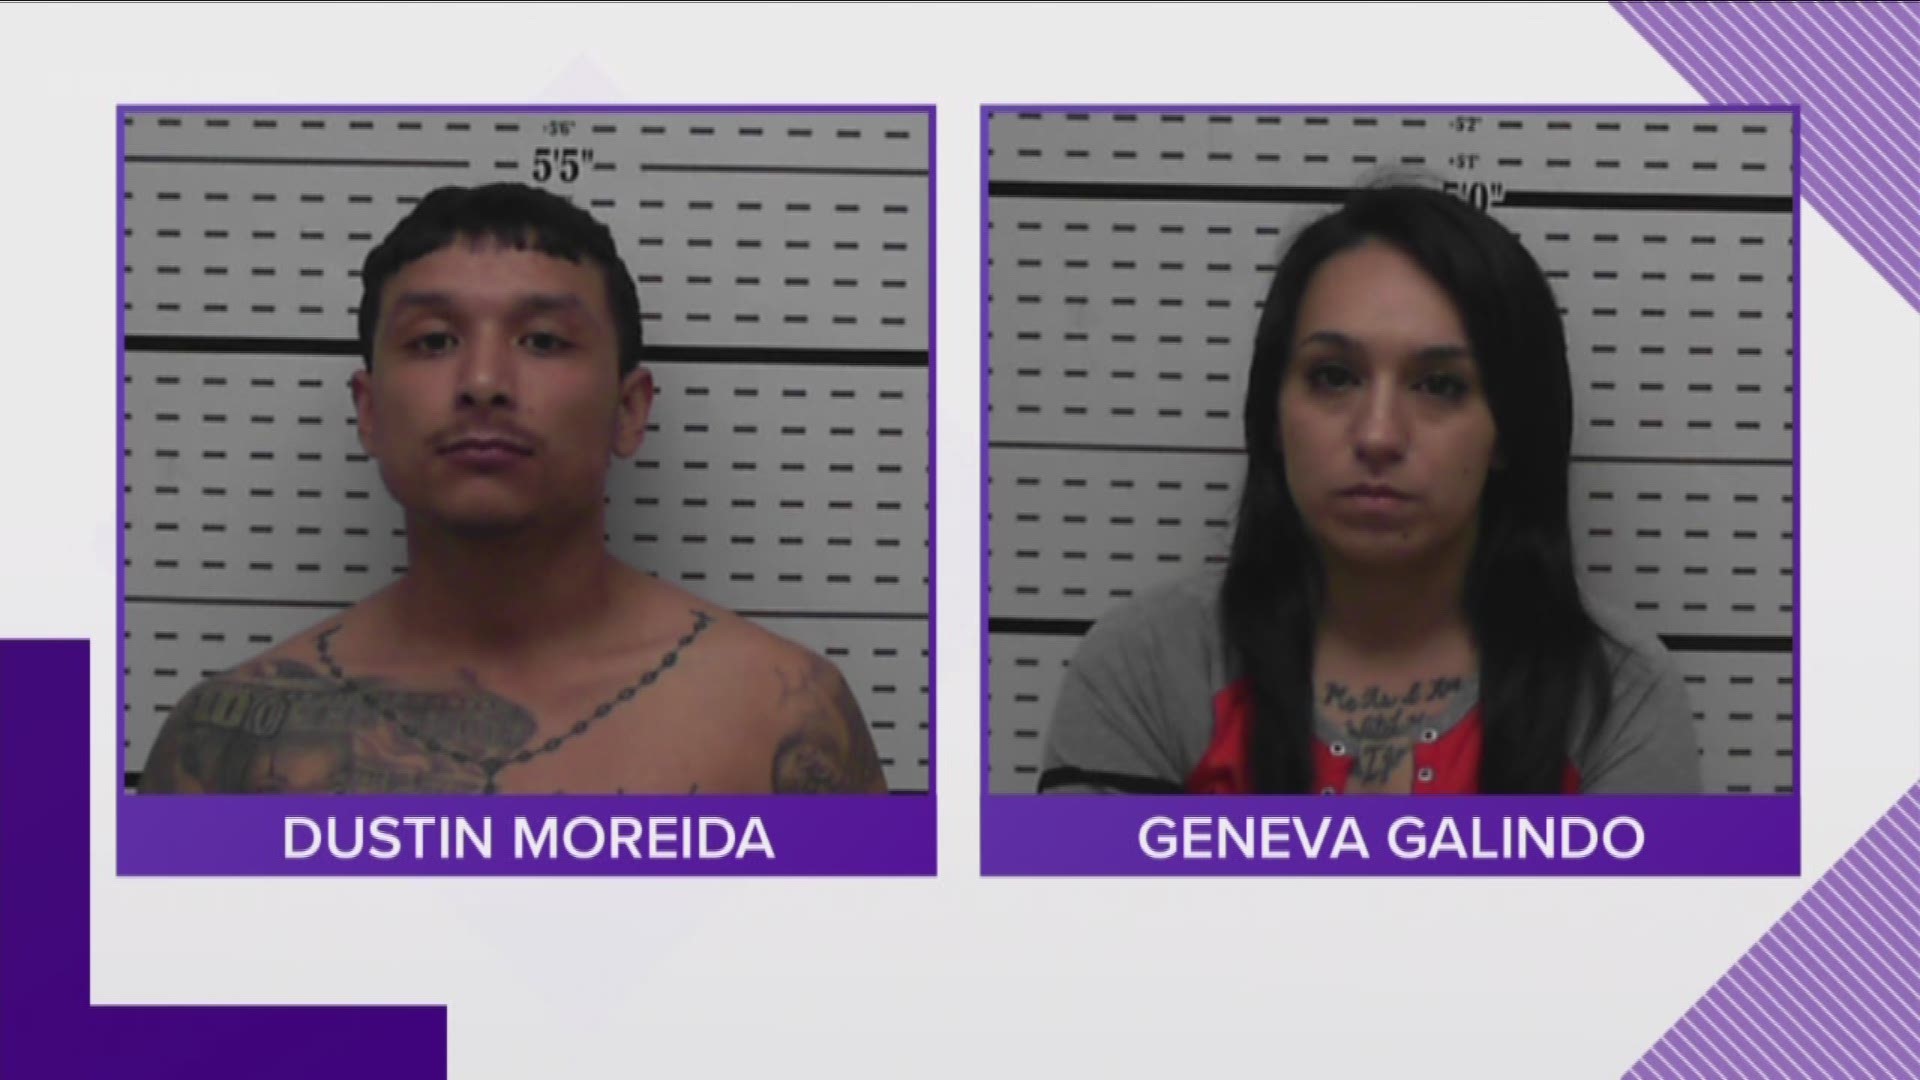 Geneva Galindo and Dustin Moreida were driving a black Toyota when the Jim Wells County Narcotics Division stopped them